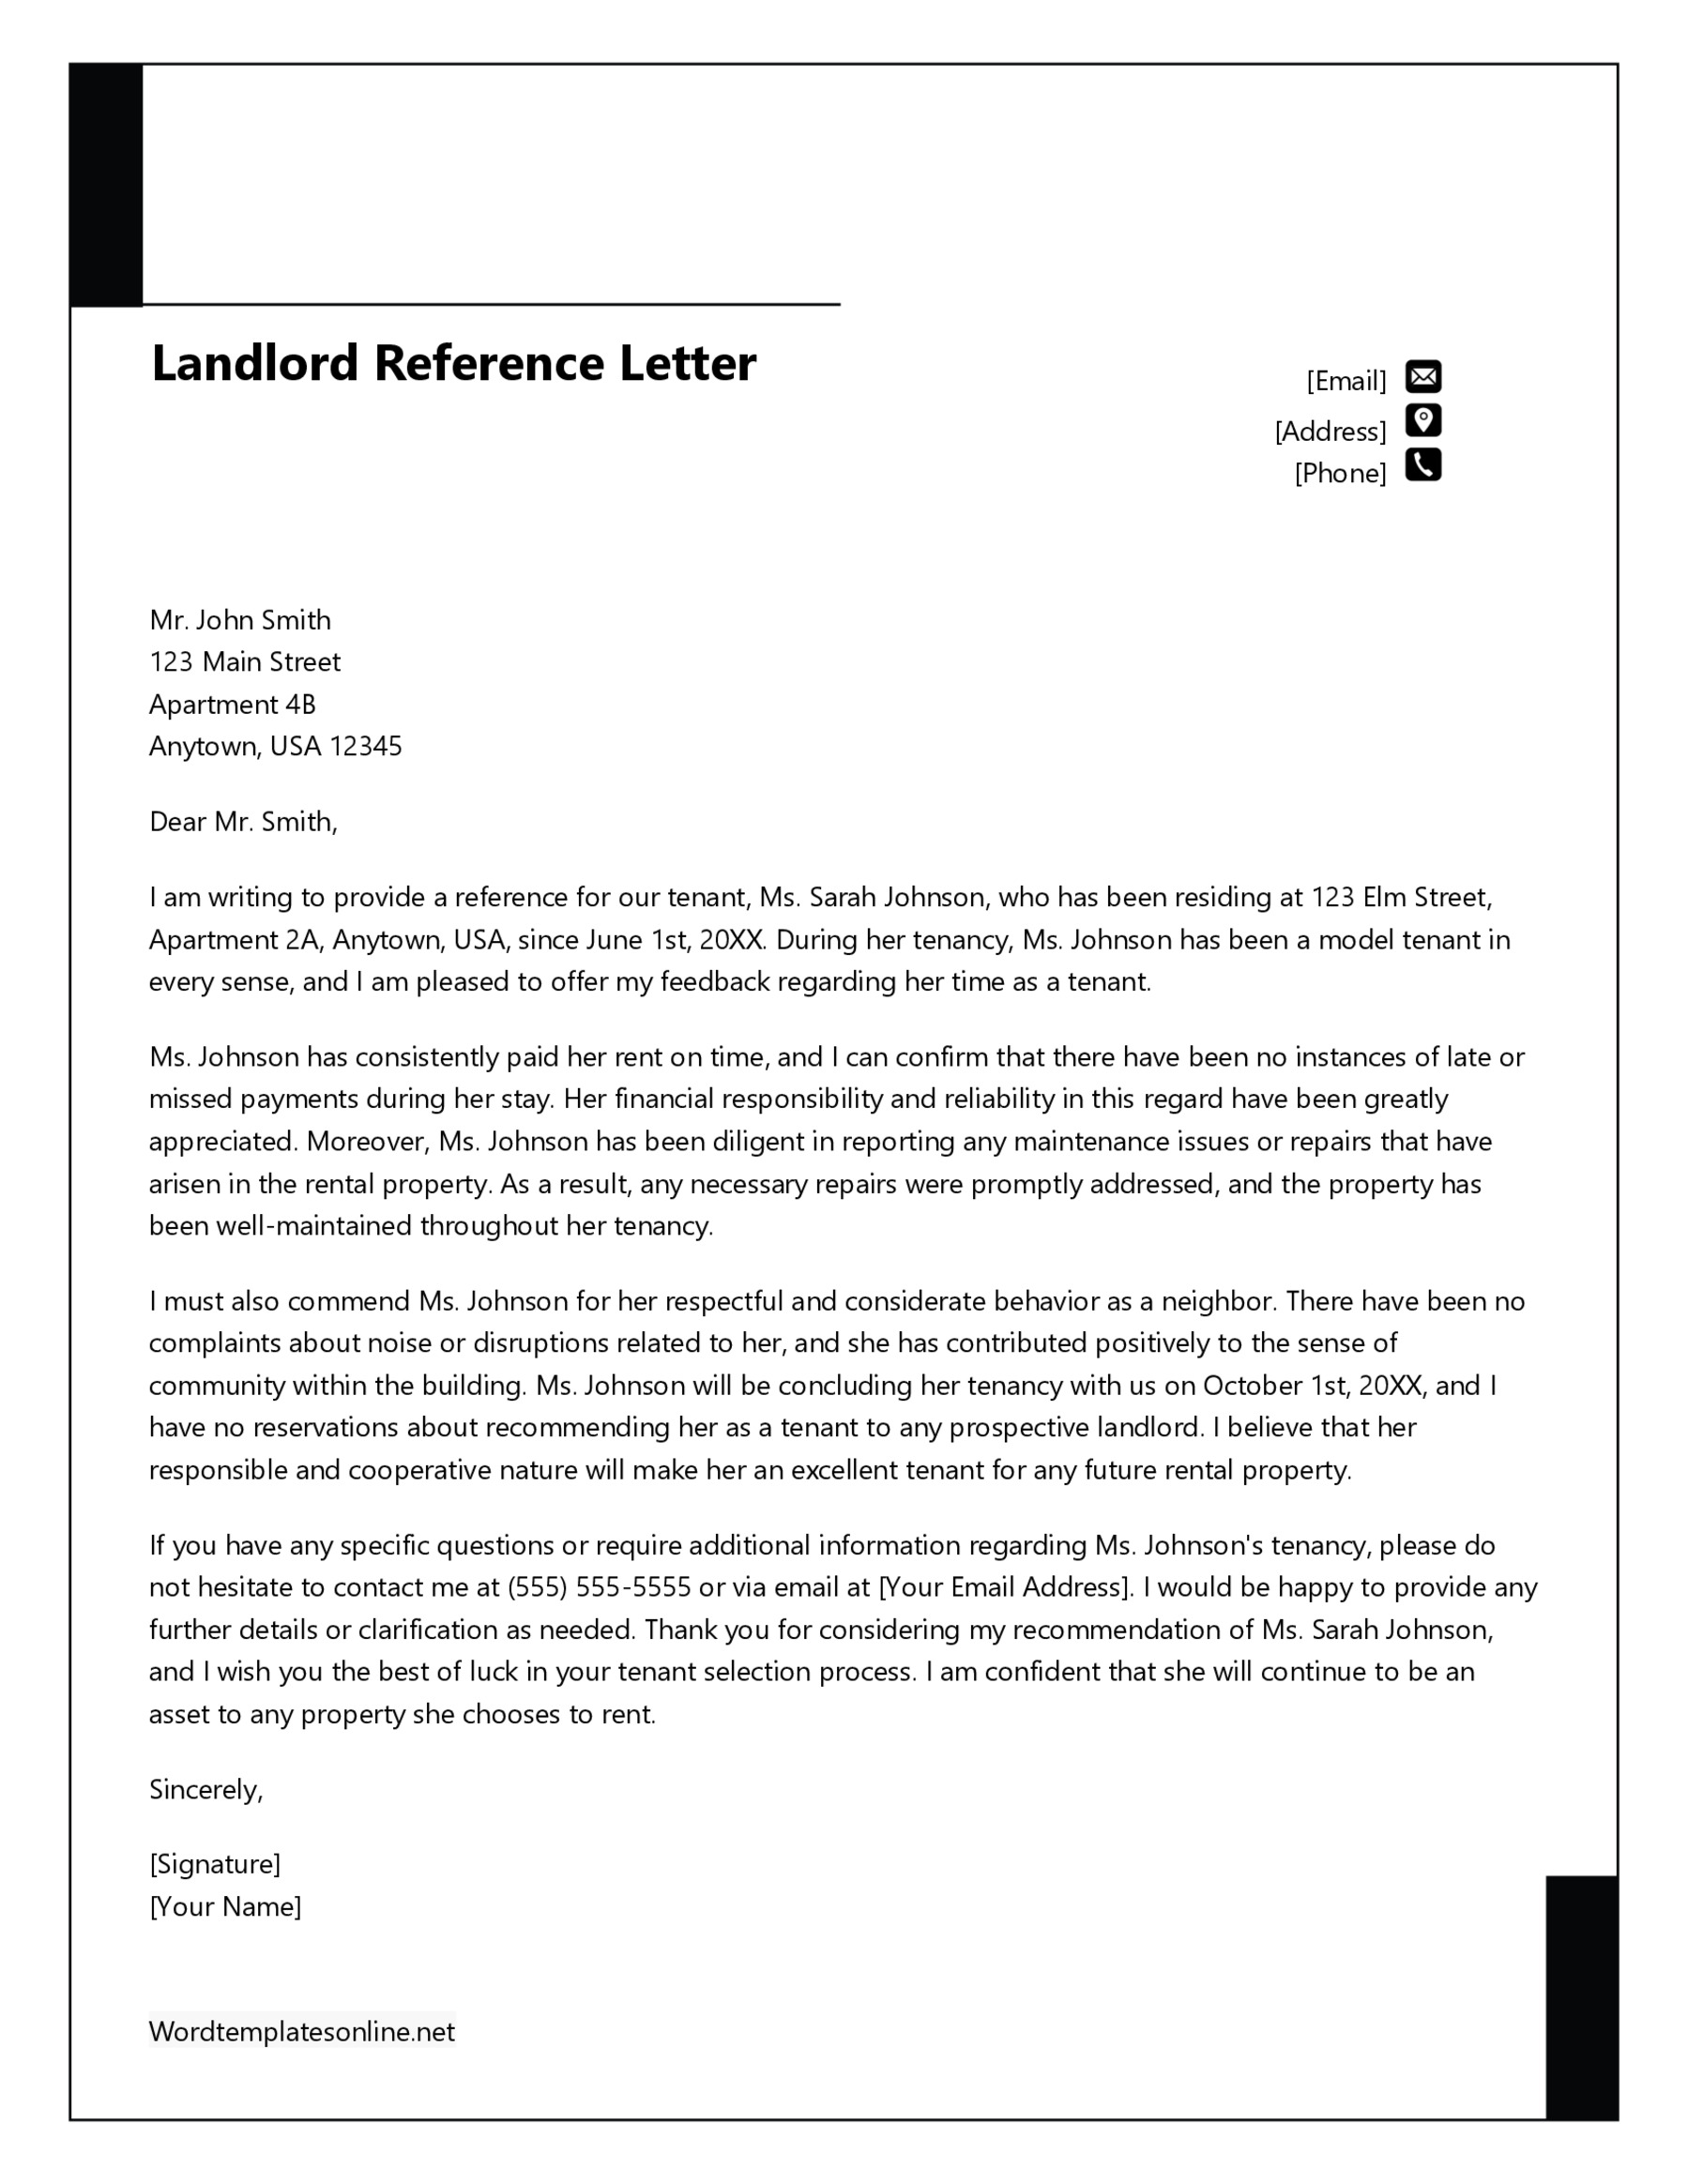 Editable Landlord Reference Letter Template in Word